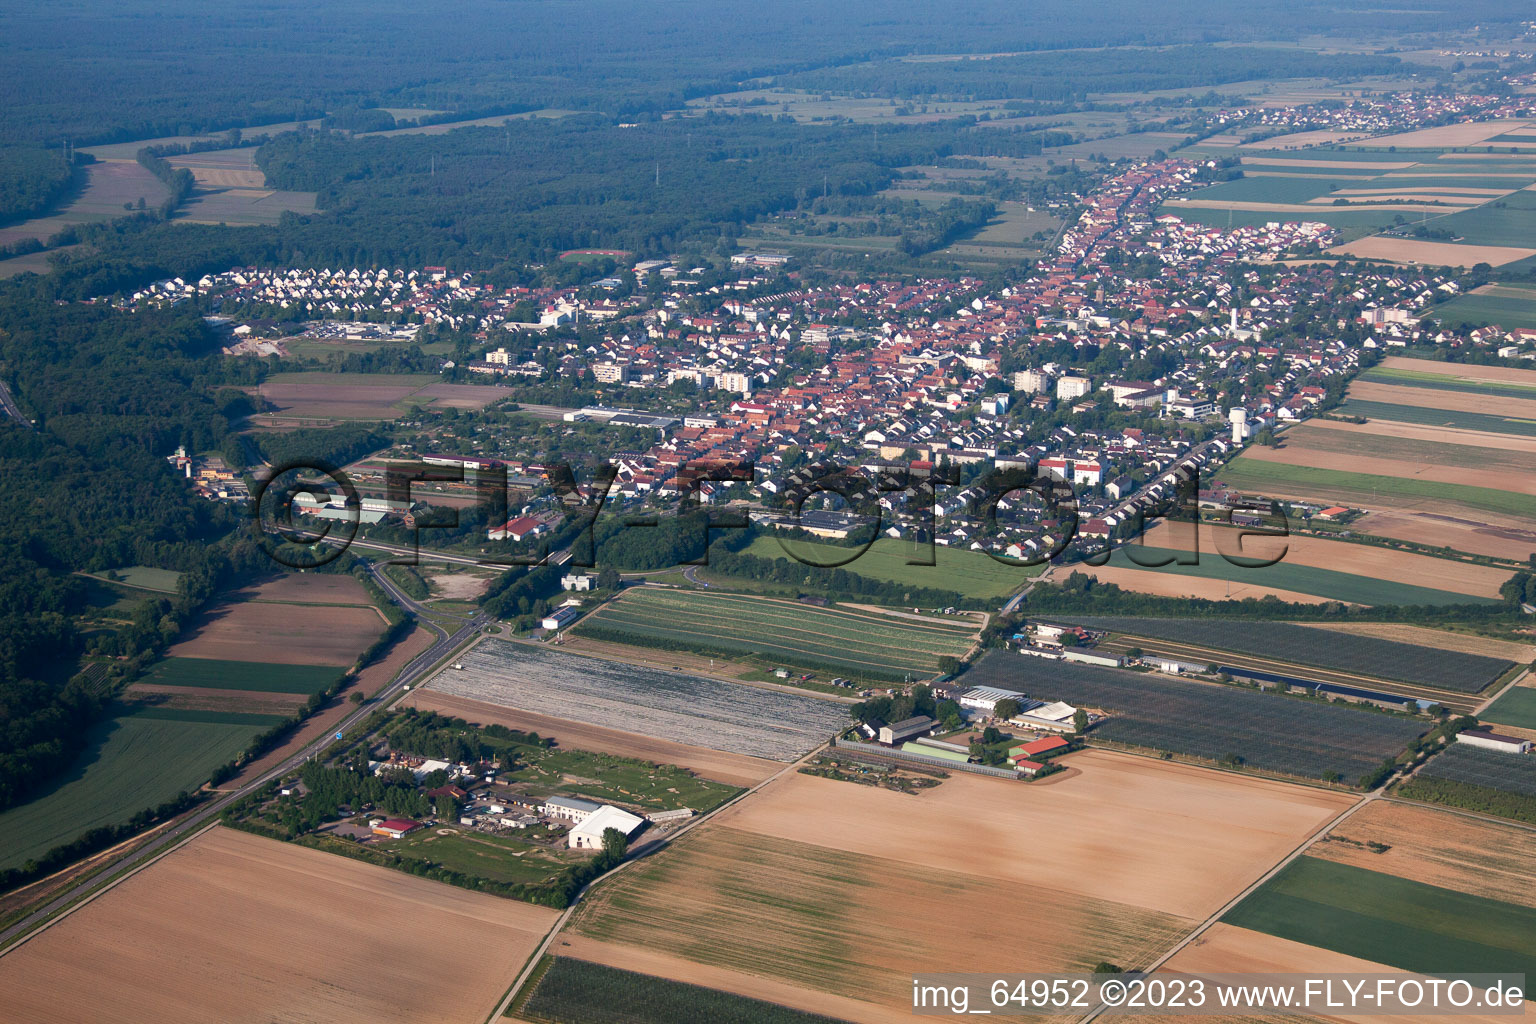 From the east in Kandel in the state Rhineland-Palatinate, Germany out of the air